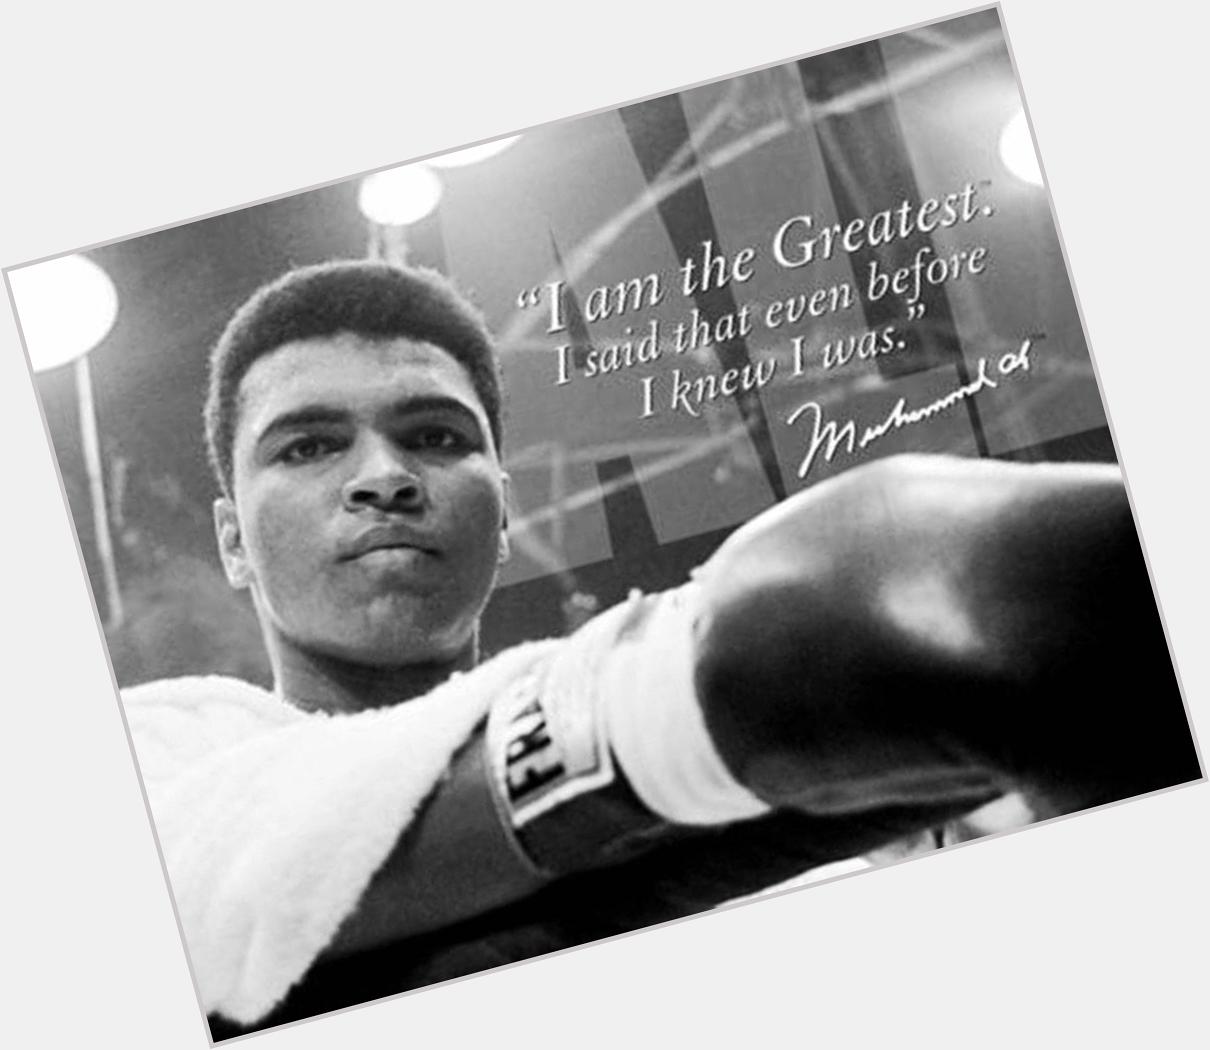 Happy birthday to Muhammad Ali!!! The greatest! Truly an inspiration. 